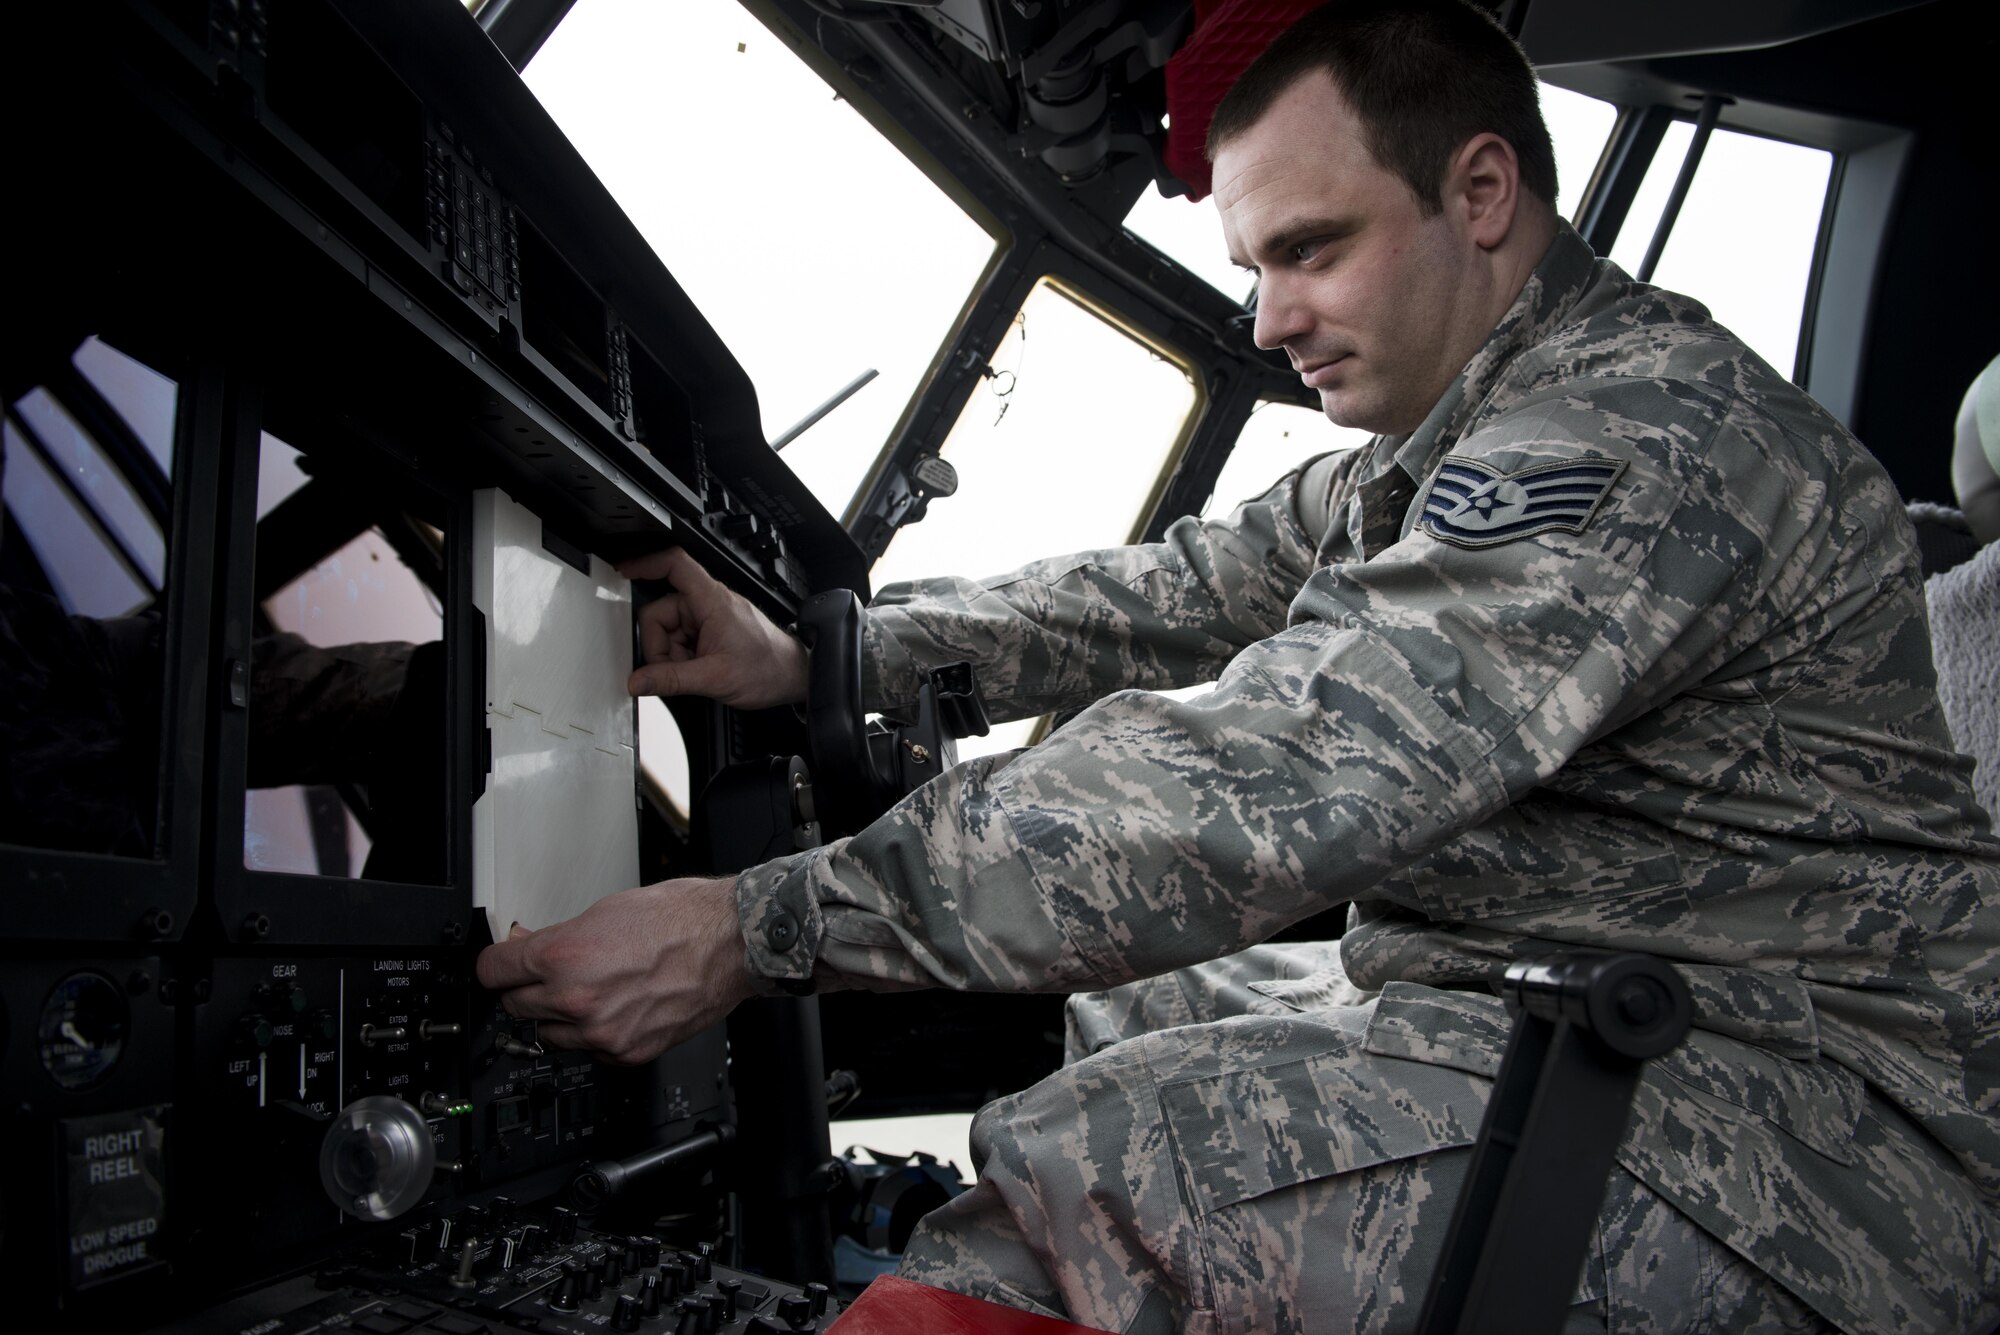 Staff Sgt. Matthew Farmer, 352d Special Operations Aircraft Maintenance Squadron Aerospace Propulsion Craftsman, outfits an MC-130J Commando II’s Color Multi-Purpose Display with a 3D printed cover on RAF Mildenhall, April 8, 2016. Farmer designed the covers to protect the $70k screens from damage occurring during routine maintenance. Farmer submitted his ideas through the Airmen Powered by Innovation program and was notified that both were approved with a plan to implement. (U.S. Air Force photo by 1st Lt Chris Sullivan/Released)